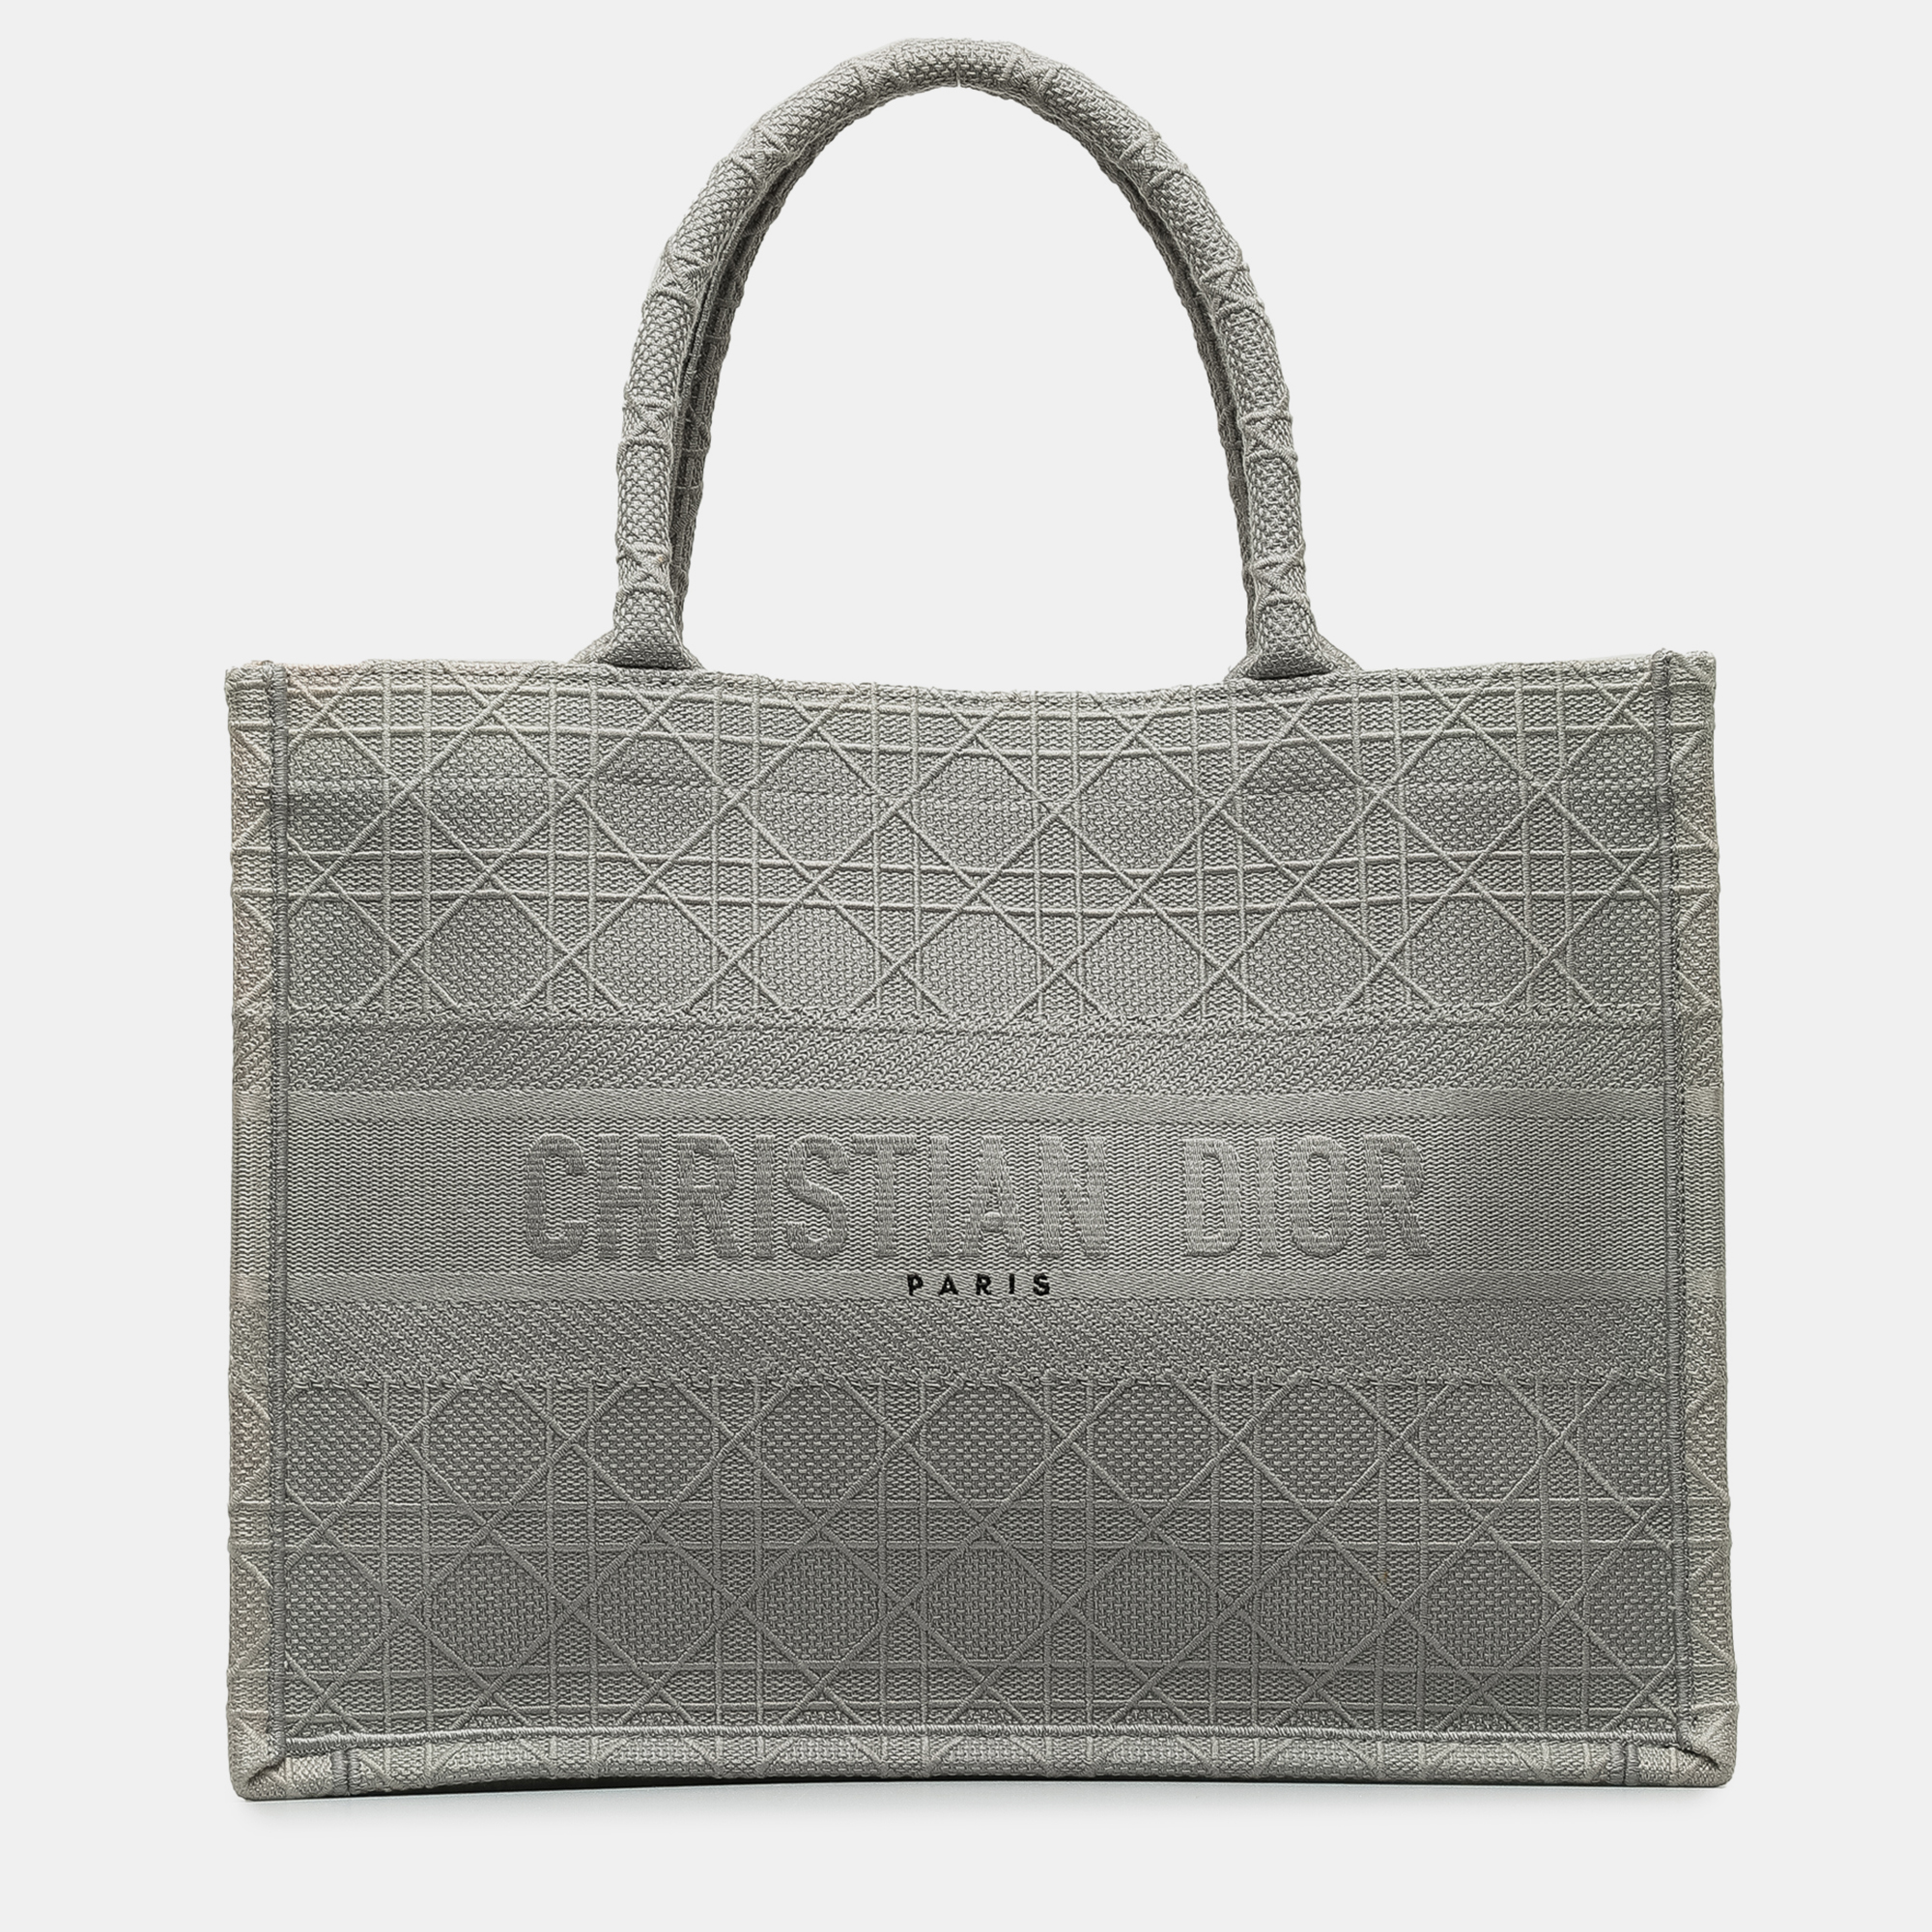 Dior medium cannage embroidered book tote